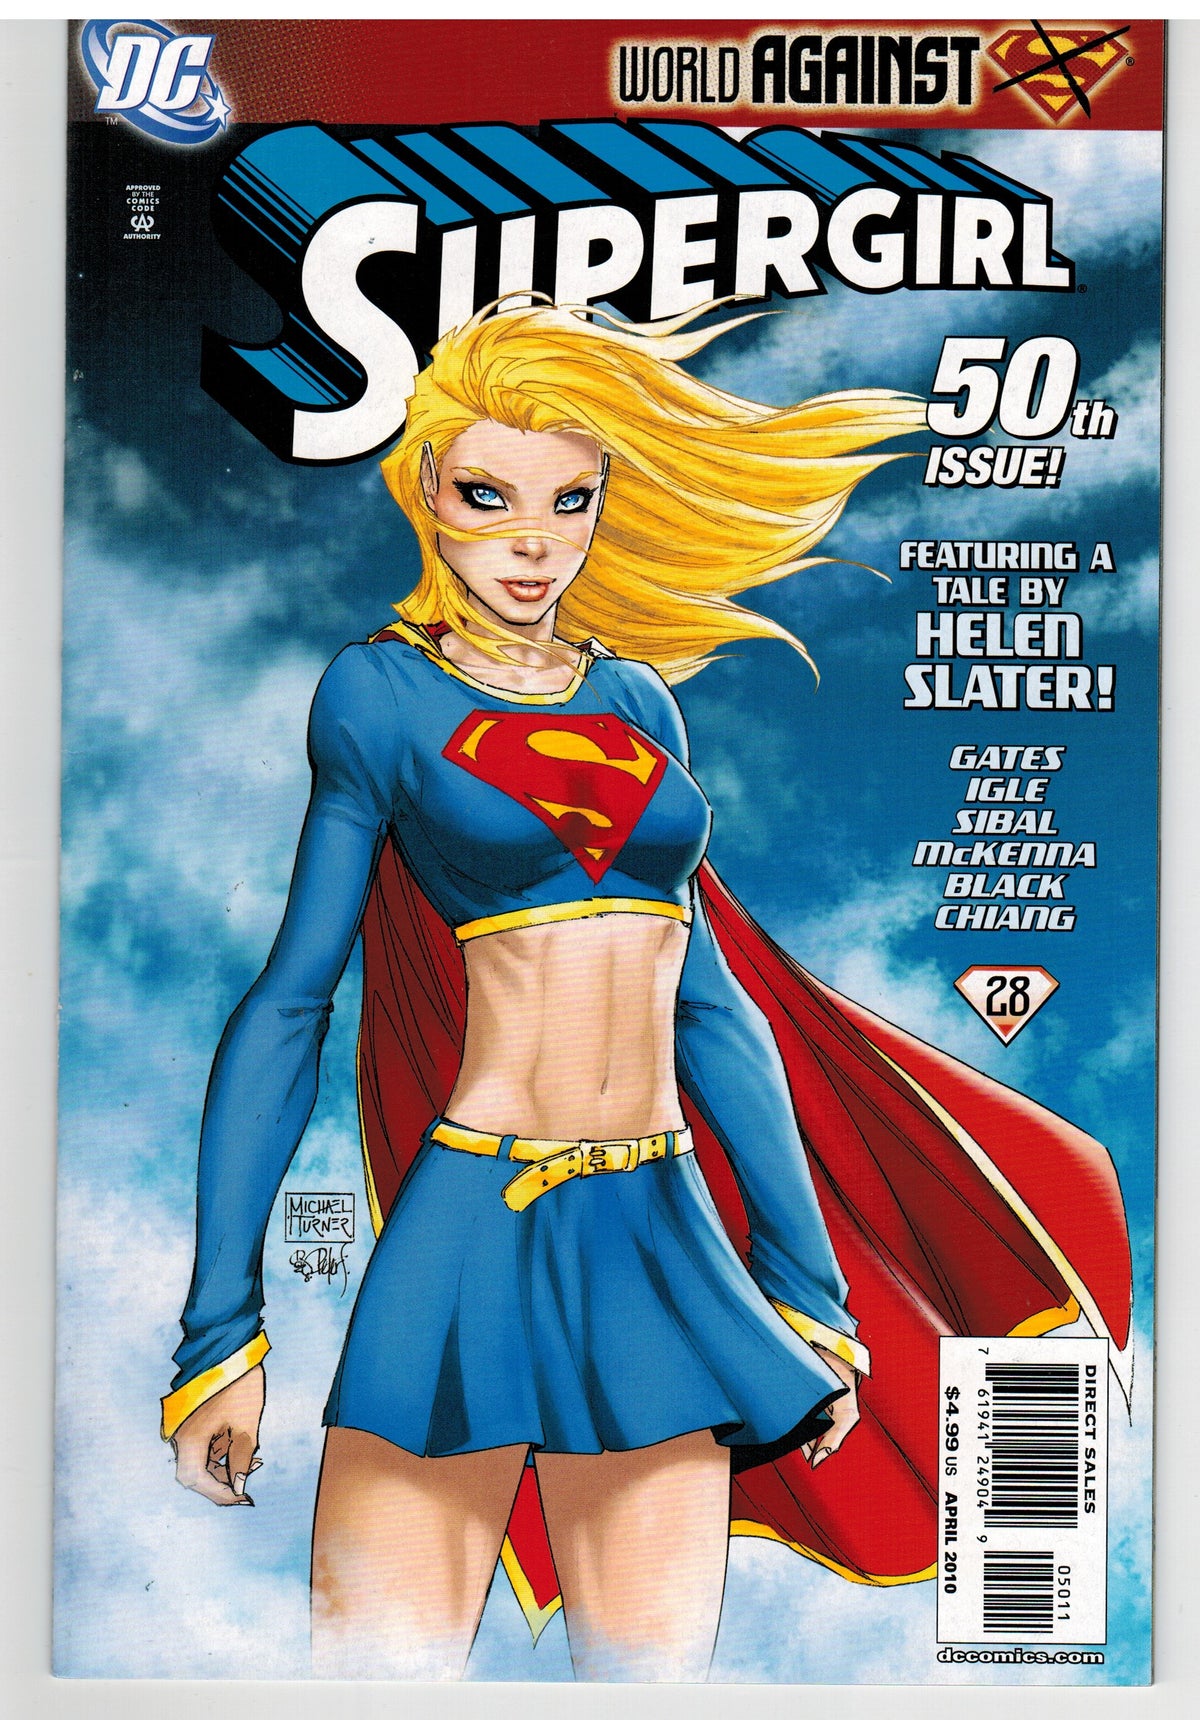 Photo of Supergirl, Vol. 5 (2010) Issue 50A - Near Mint Comic sold by Stronghold Collectibles